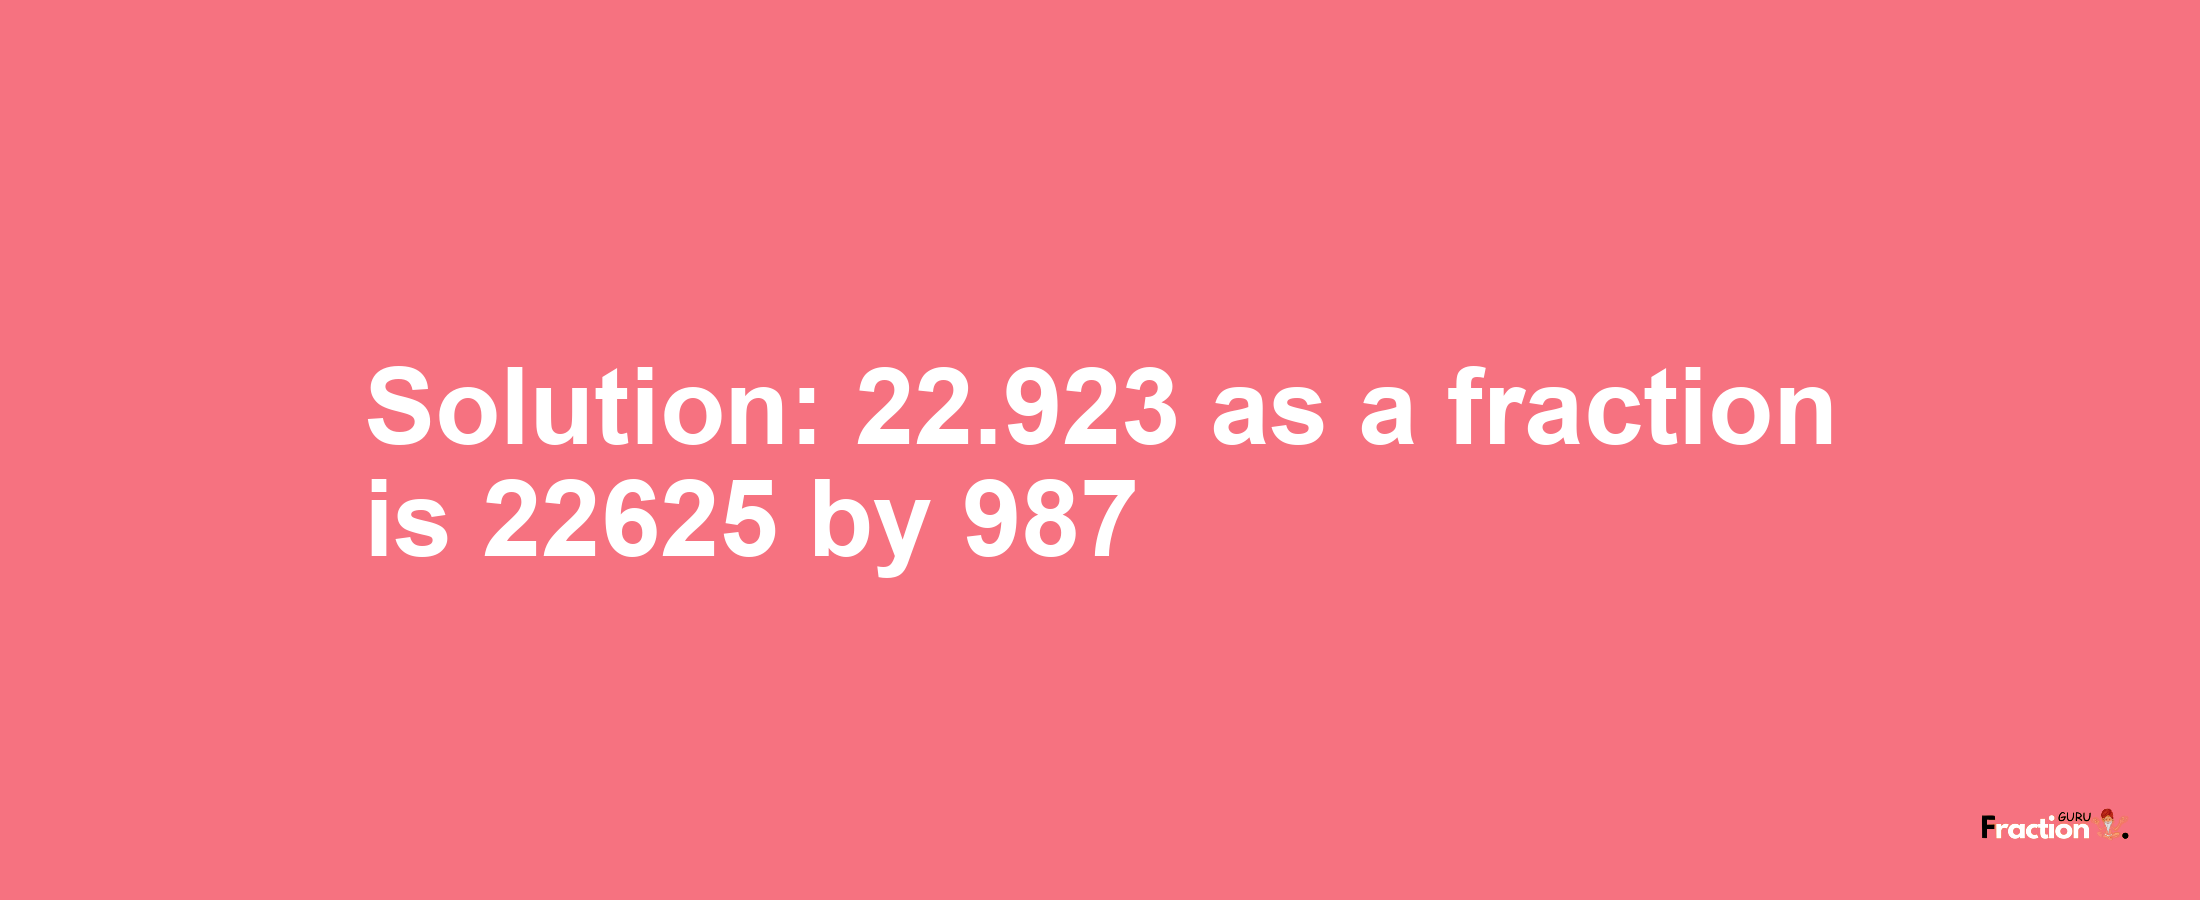 Solution:22.923 as a fraction is 22625/987